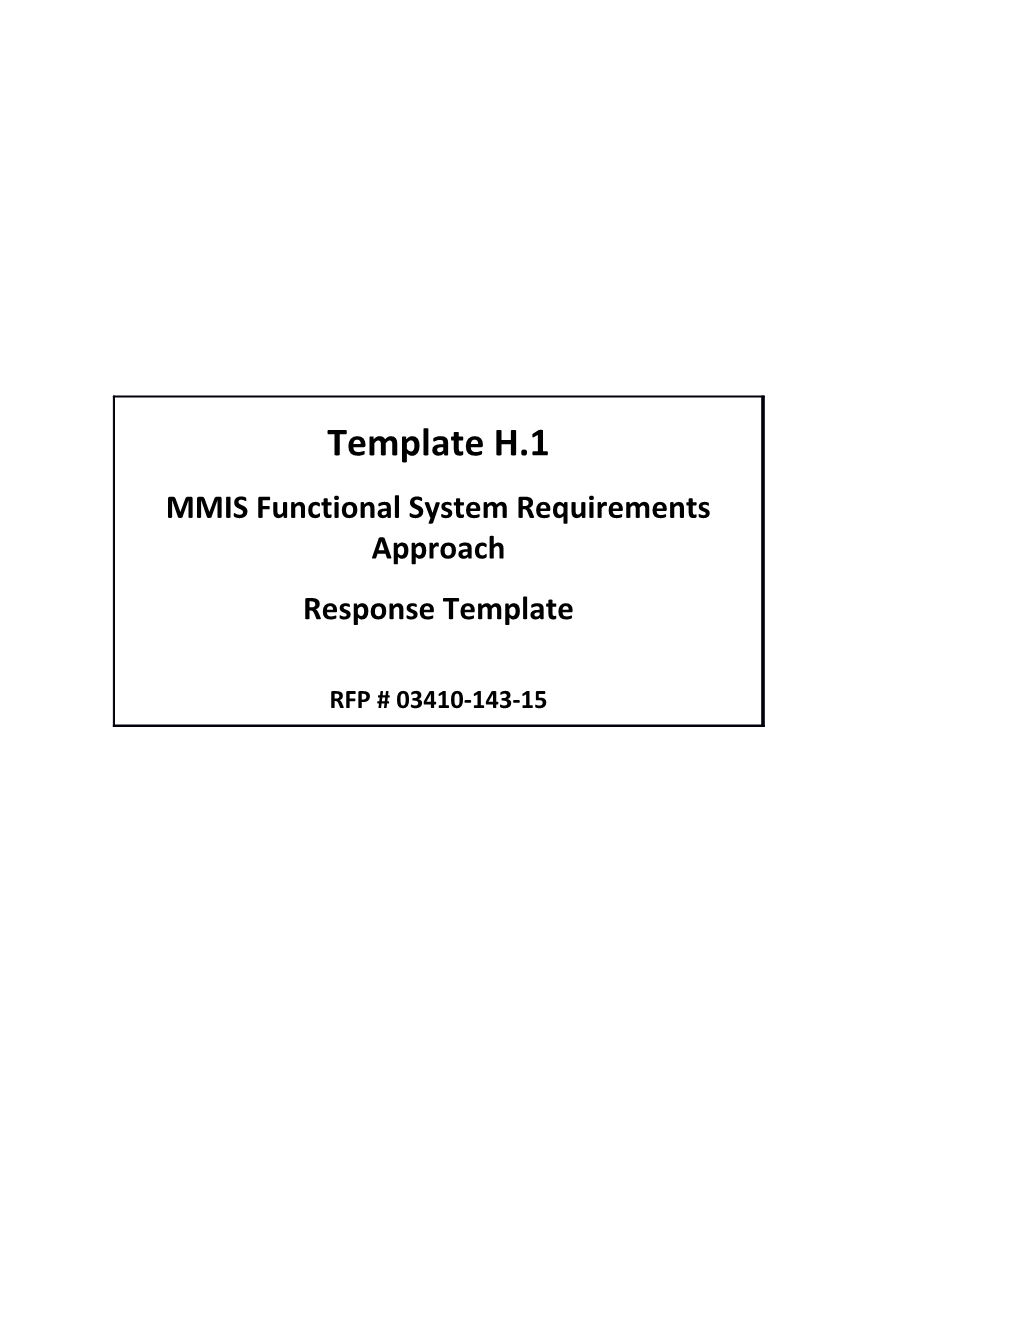 1.Functional Requirements Approach for the Medicaid Management Information System